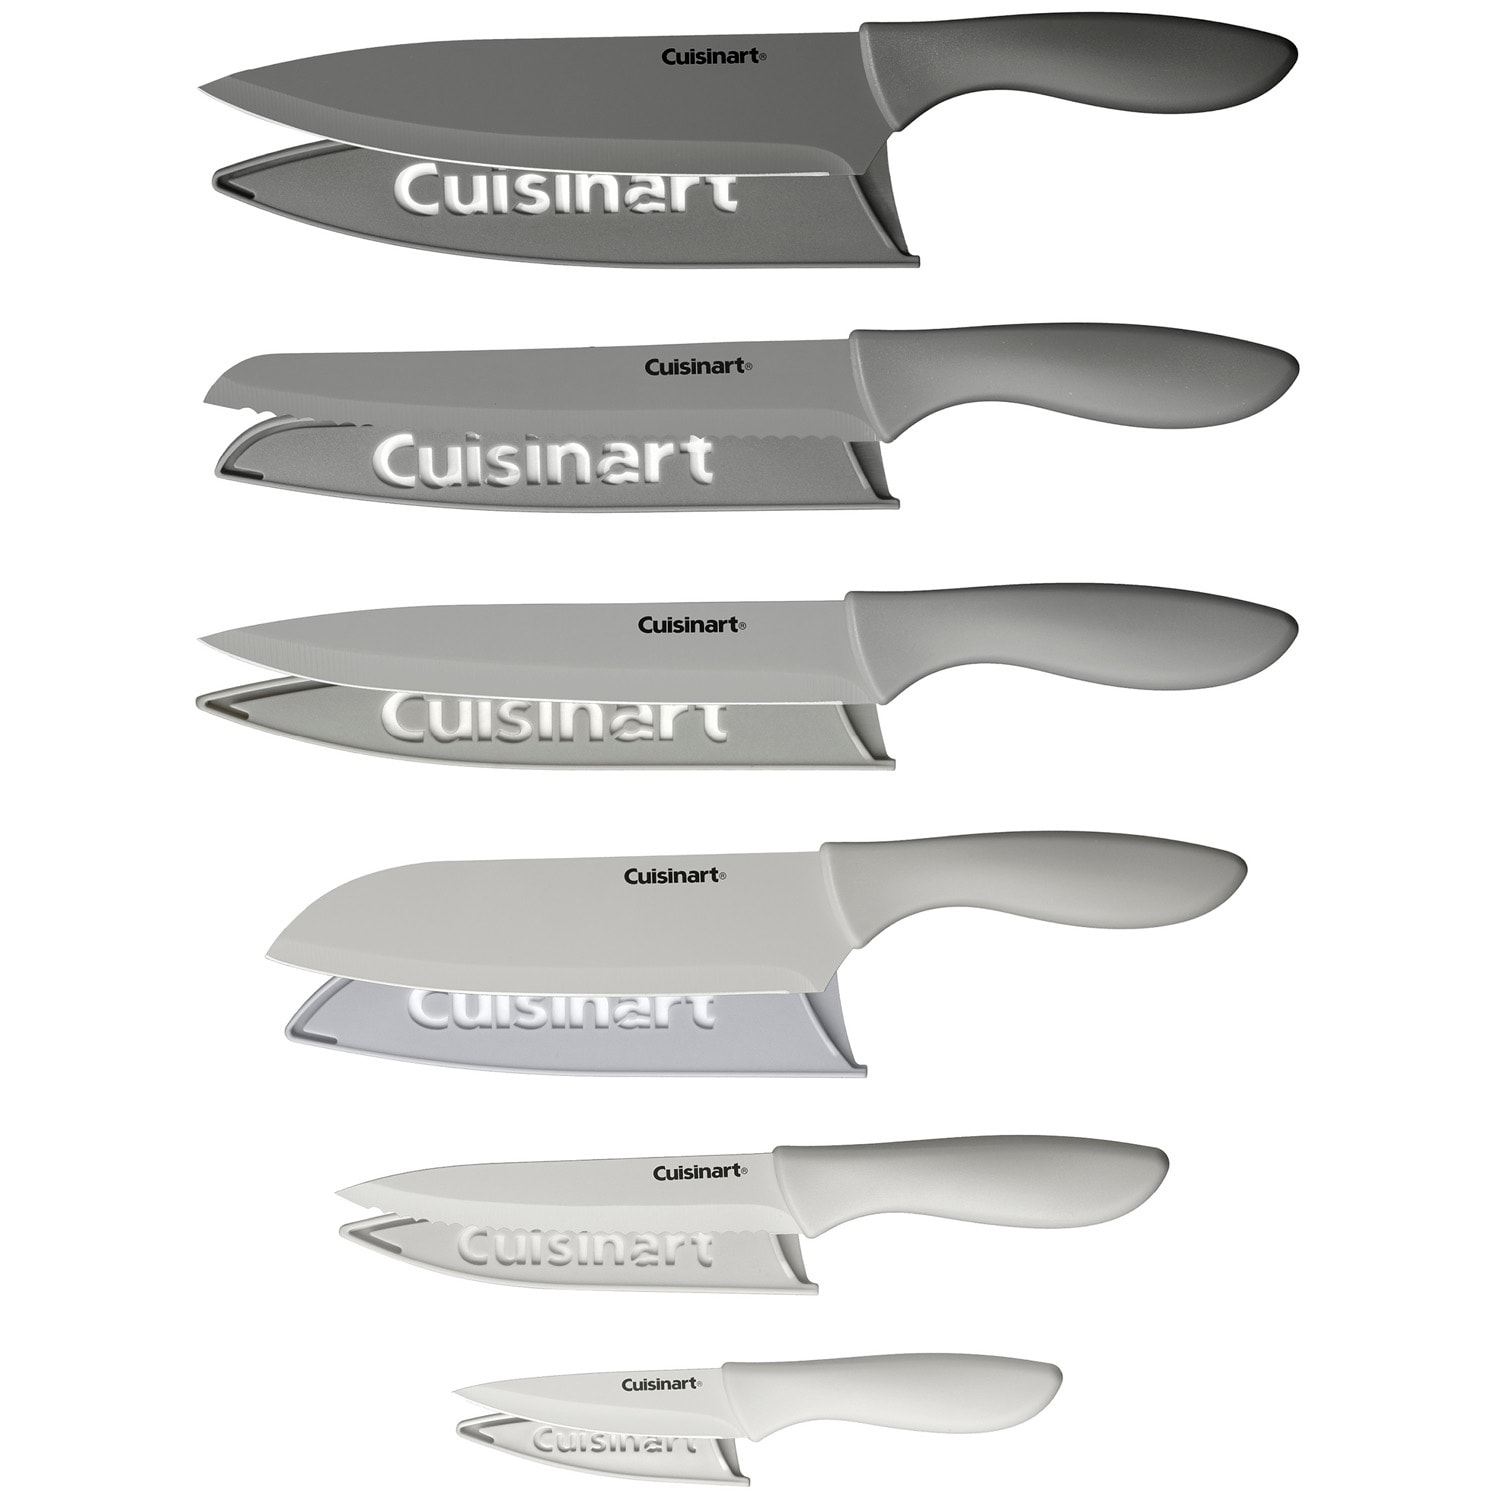 https://ak1.ostkcdn.com/images/products/is/images/direct/0d947722679a6dcea625fe52a4c40ef8389a8996/Cuisinart-Advantage-12-Piece-Gray-Knife-Set-and-Blade-Guards-C55-12PCG.jpg